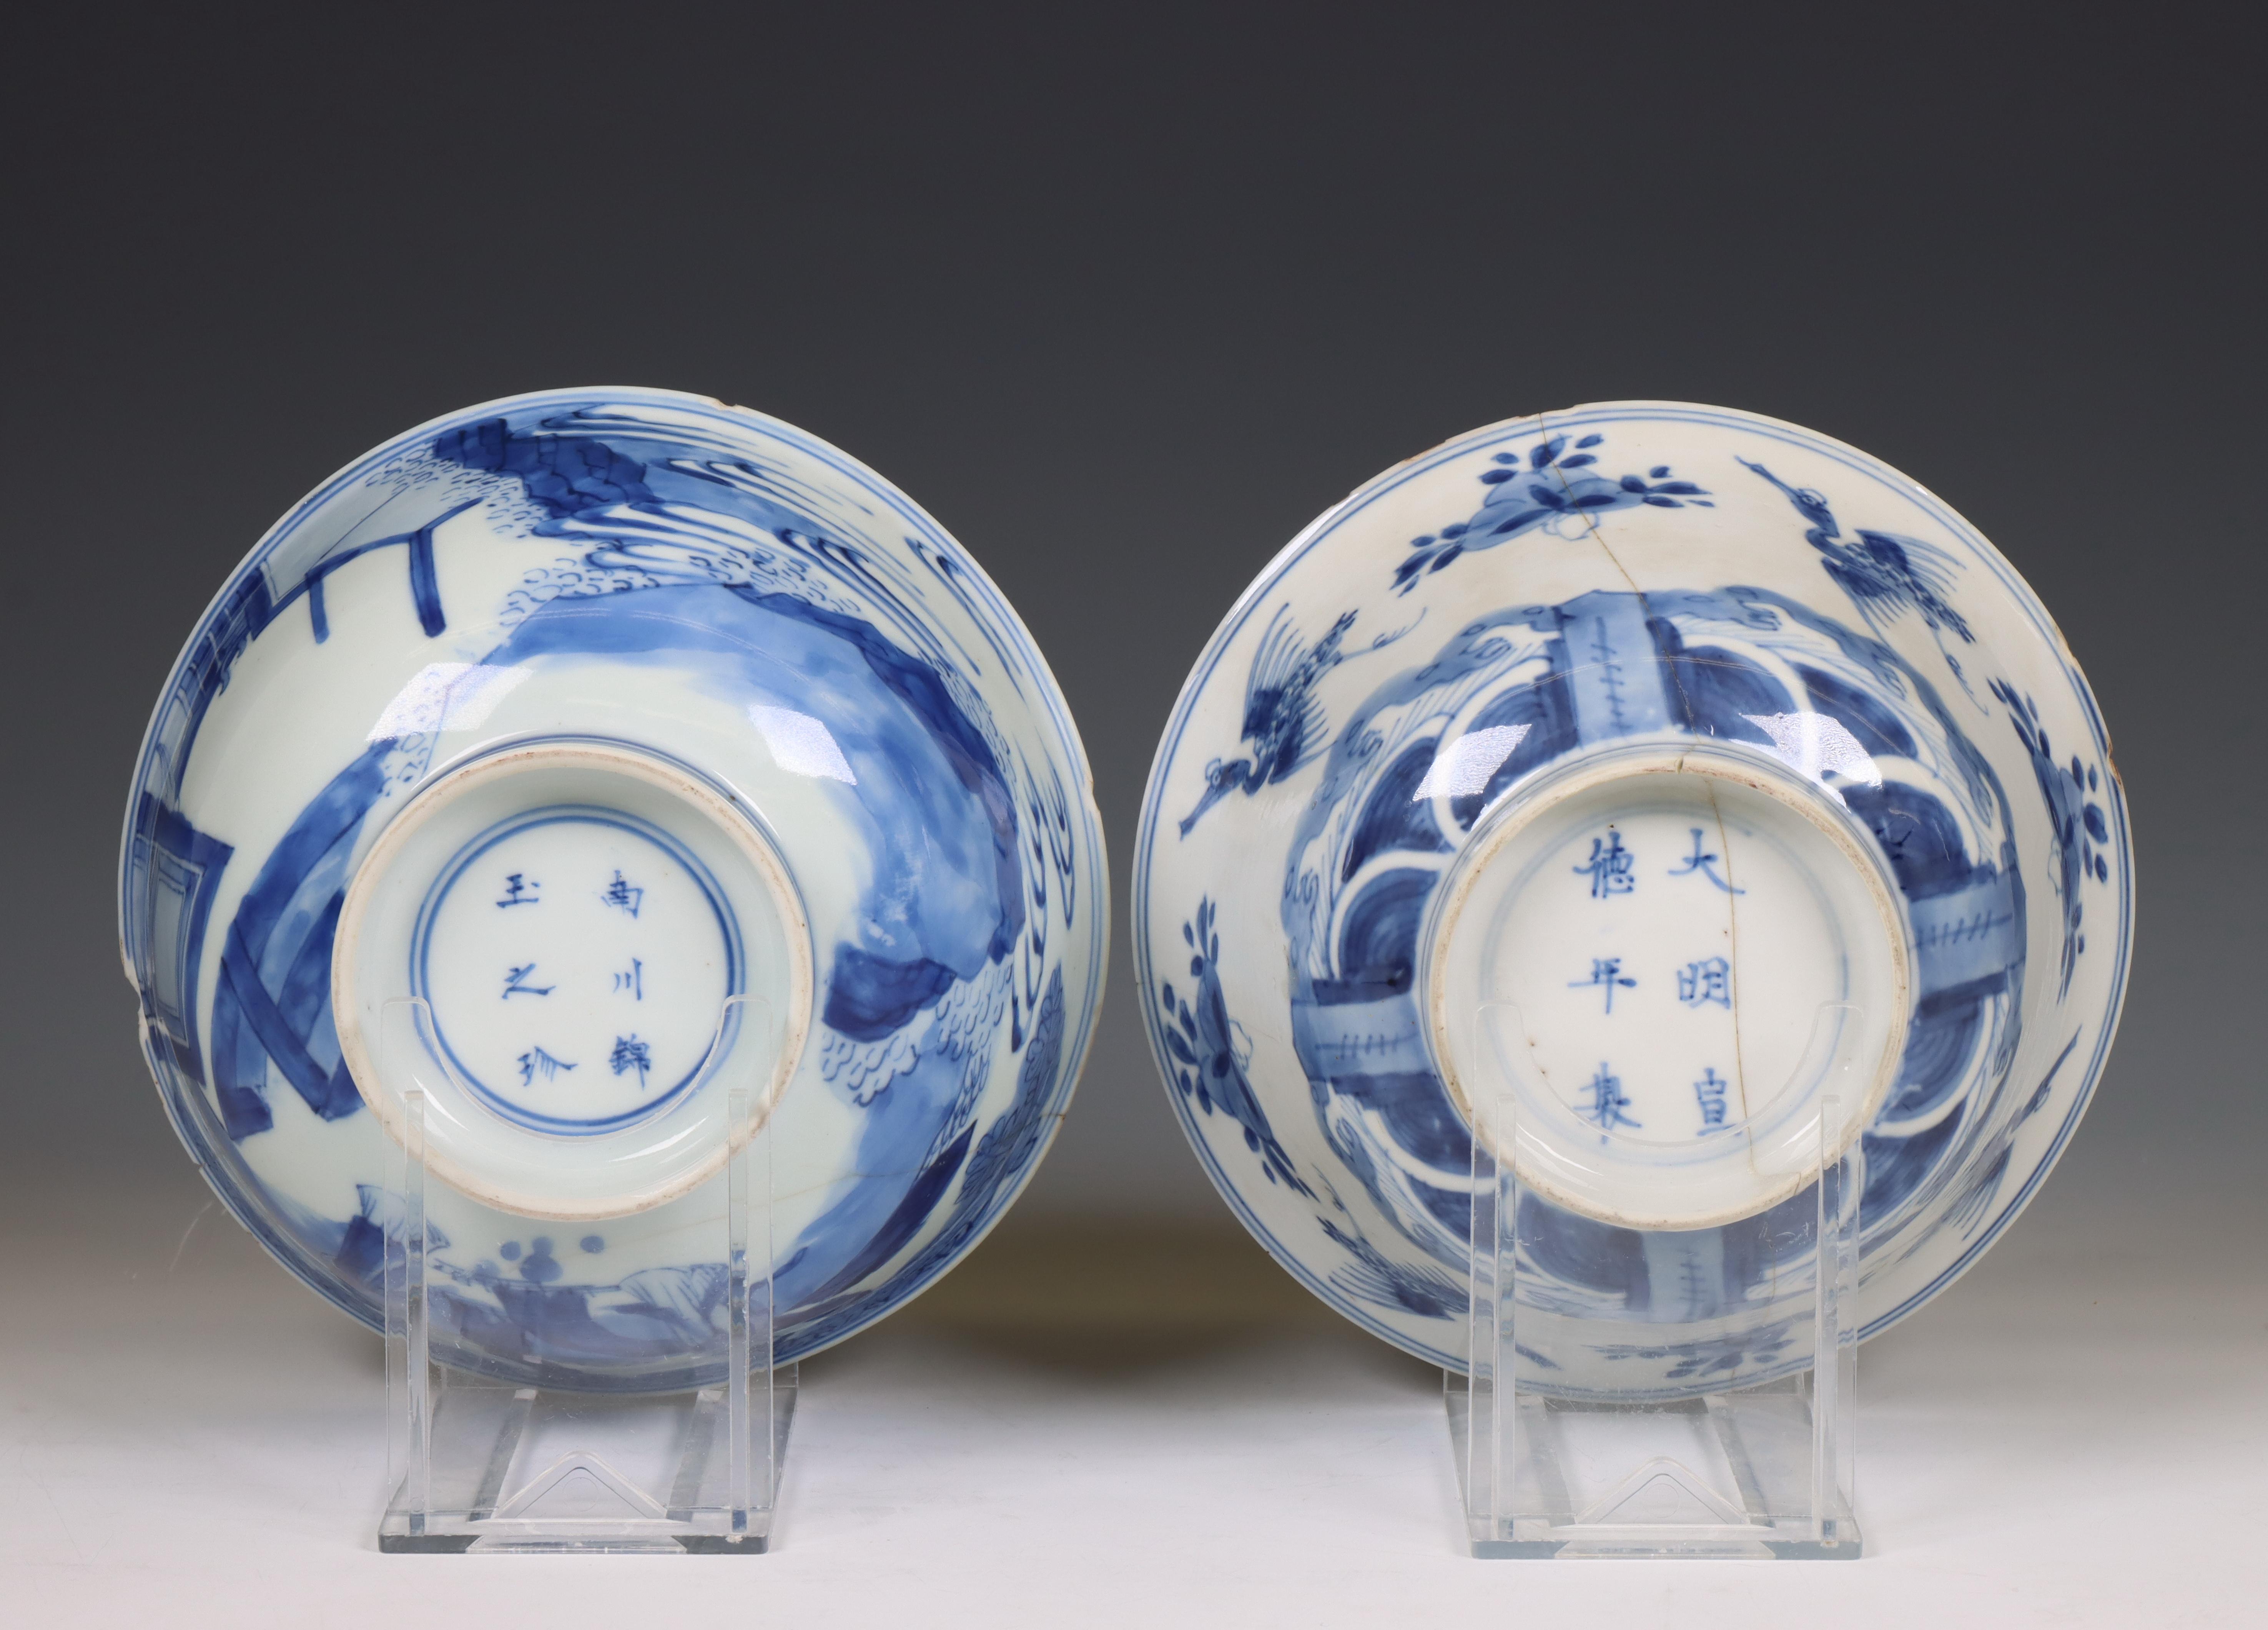 China, two blue and white porcelain bowls, Kangxi period (1662-1722), - Image 4 of 5